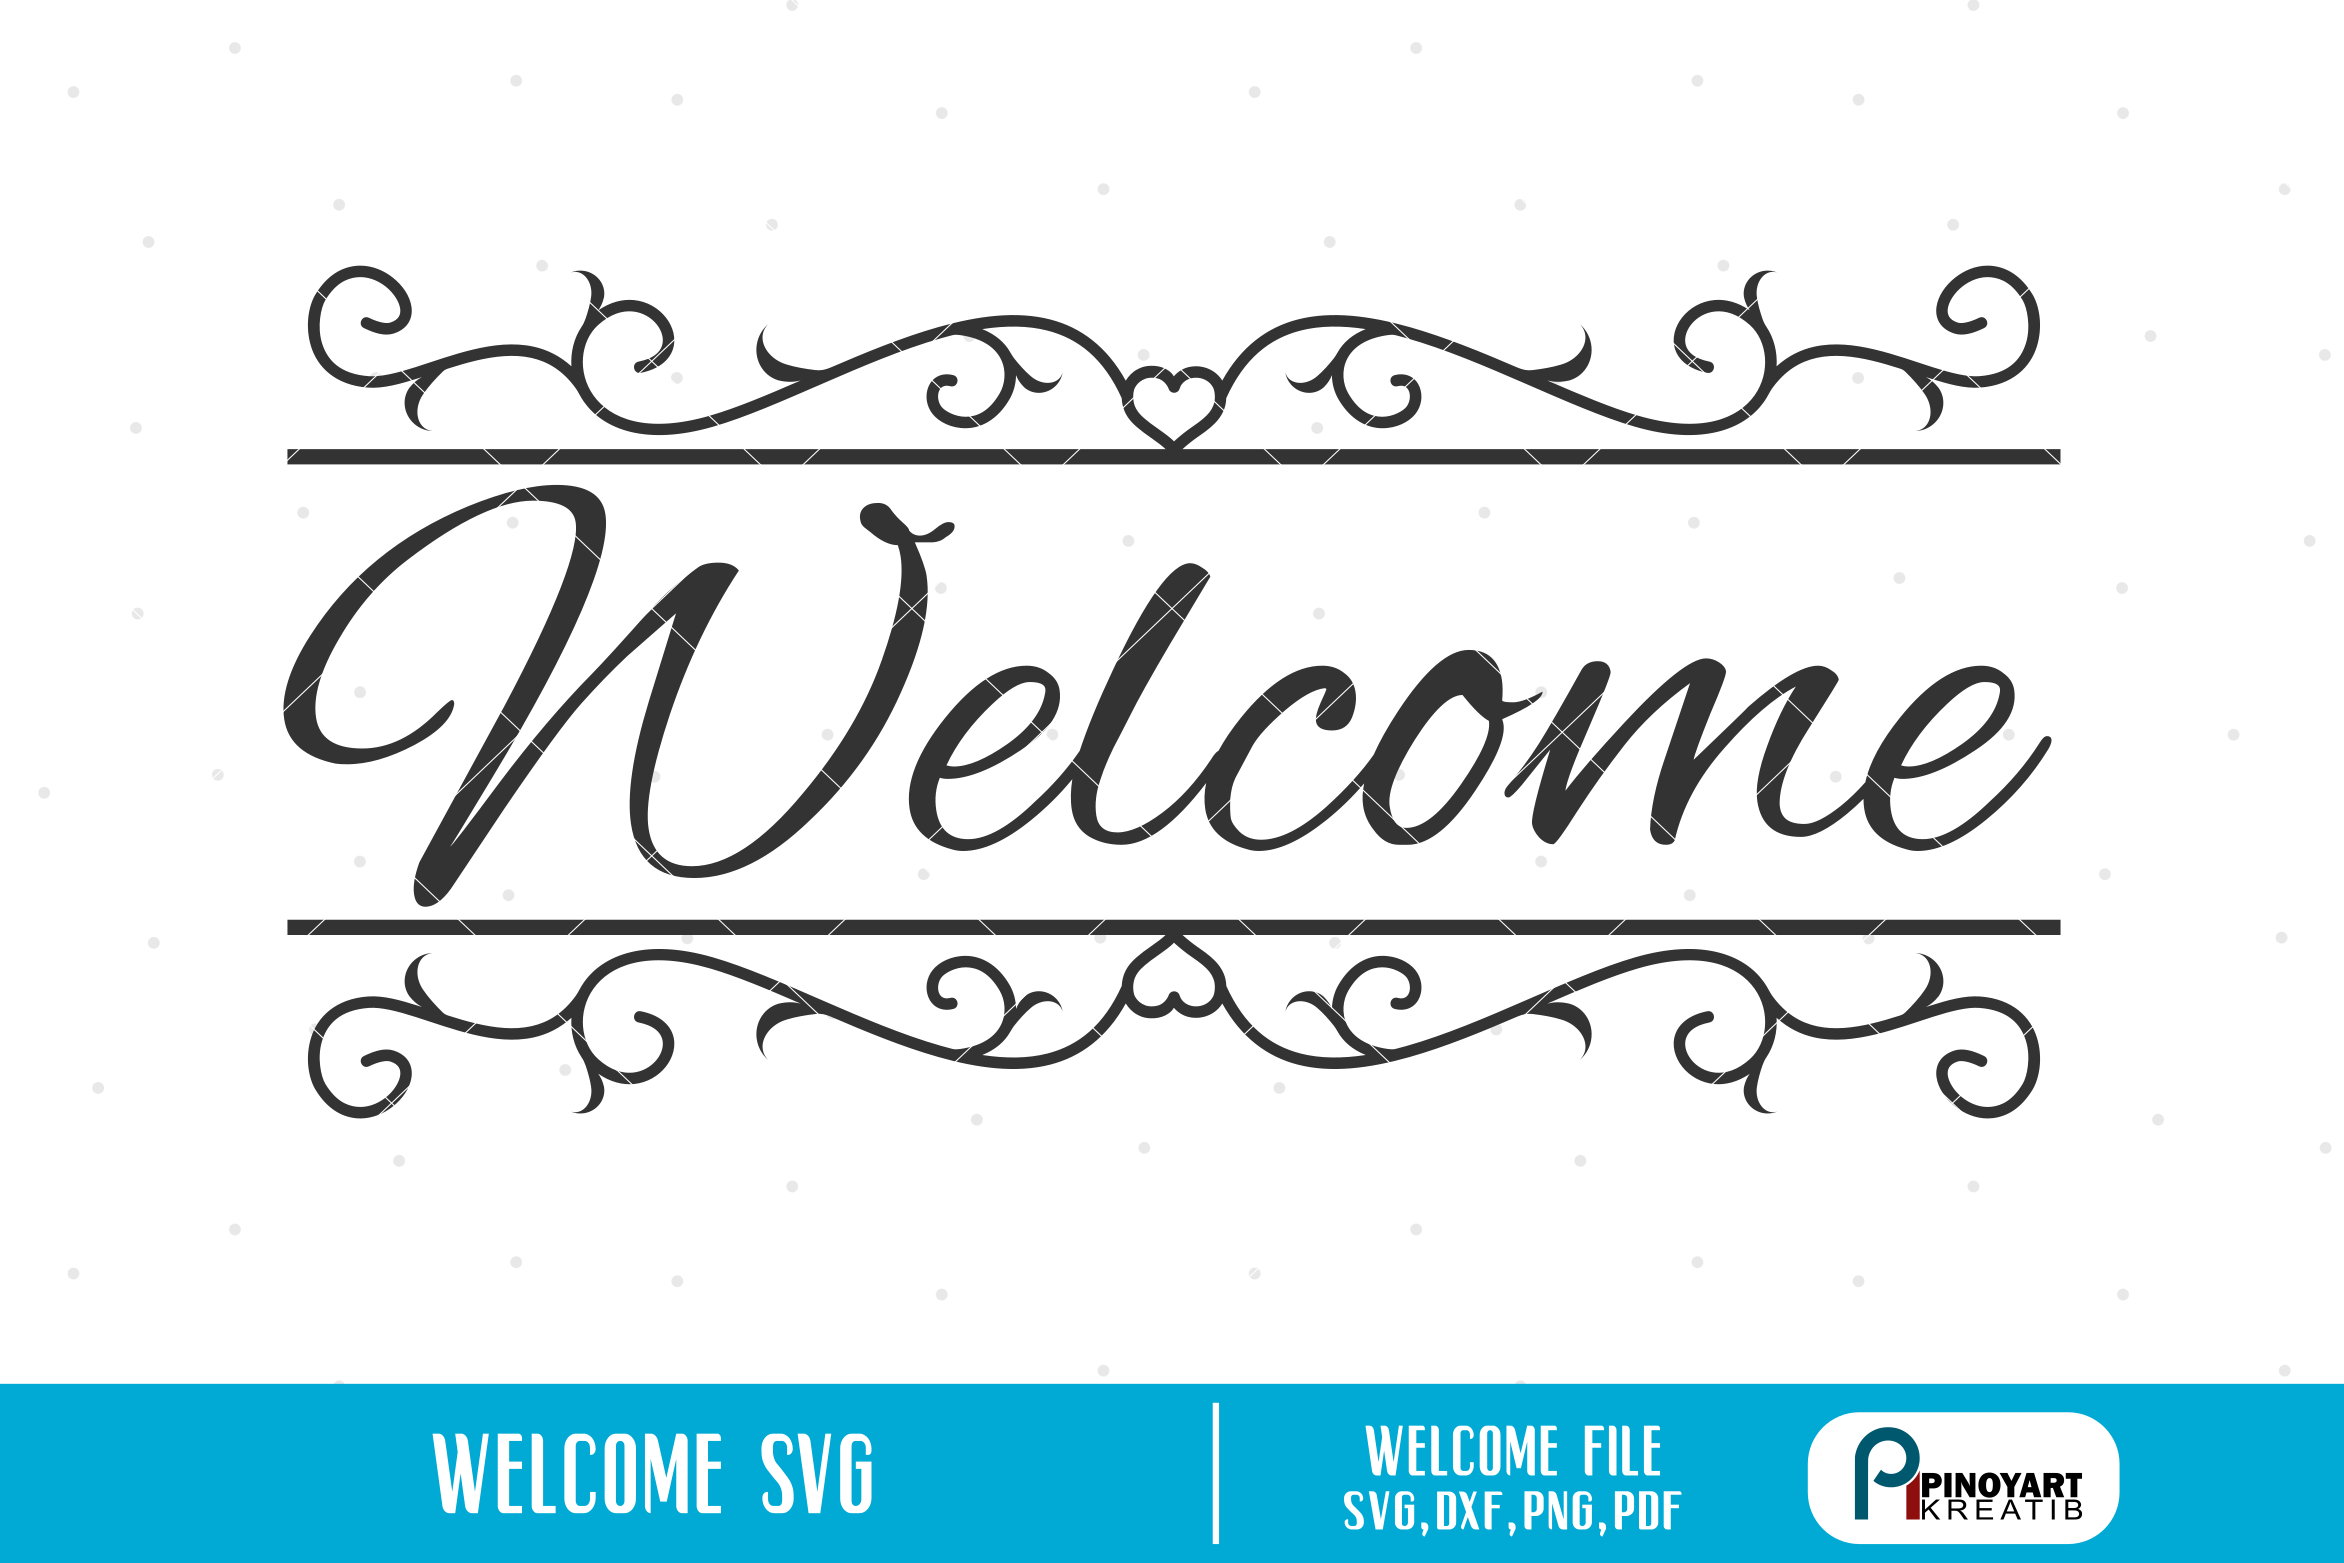 Welcome svg - a welcome vector file example image 1.